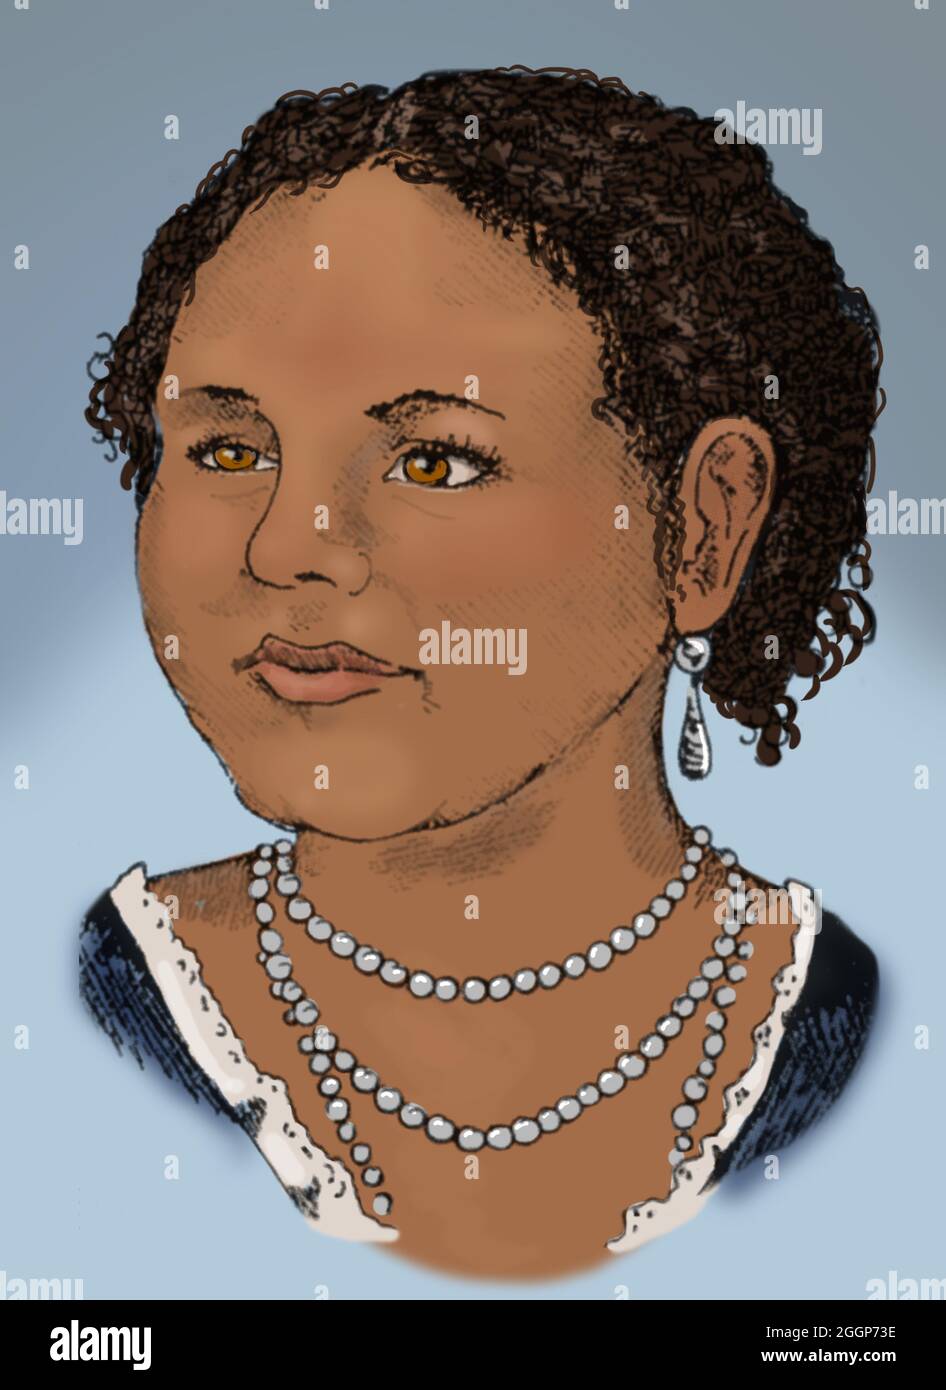 Mary Seacole (1805-1881) was a British-Jamaican businesswoman and nurse. During the Crimean War, she ran a hotel and tended to the wounded. Her autobiography, Wonderful Adventures of Mrs. Seacole in Many Lands (1857), is one of the earliest autobiographies of a mixed-race woman. In 2004 she was voted the greatest black Briton. Colorized. Stock Photo